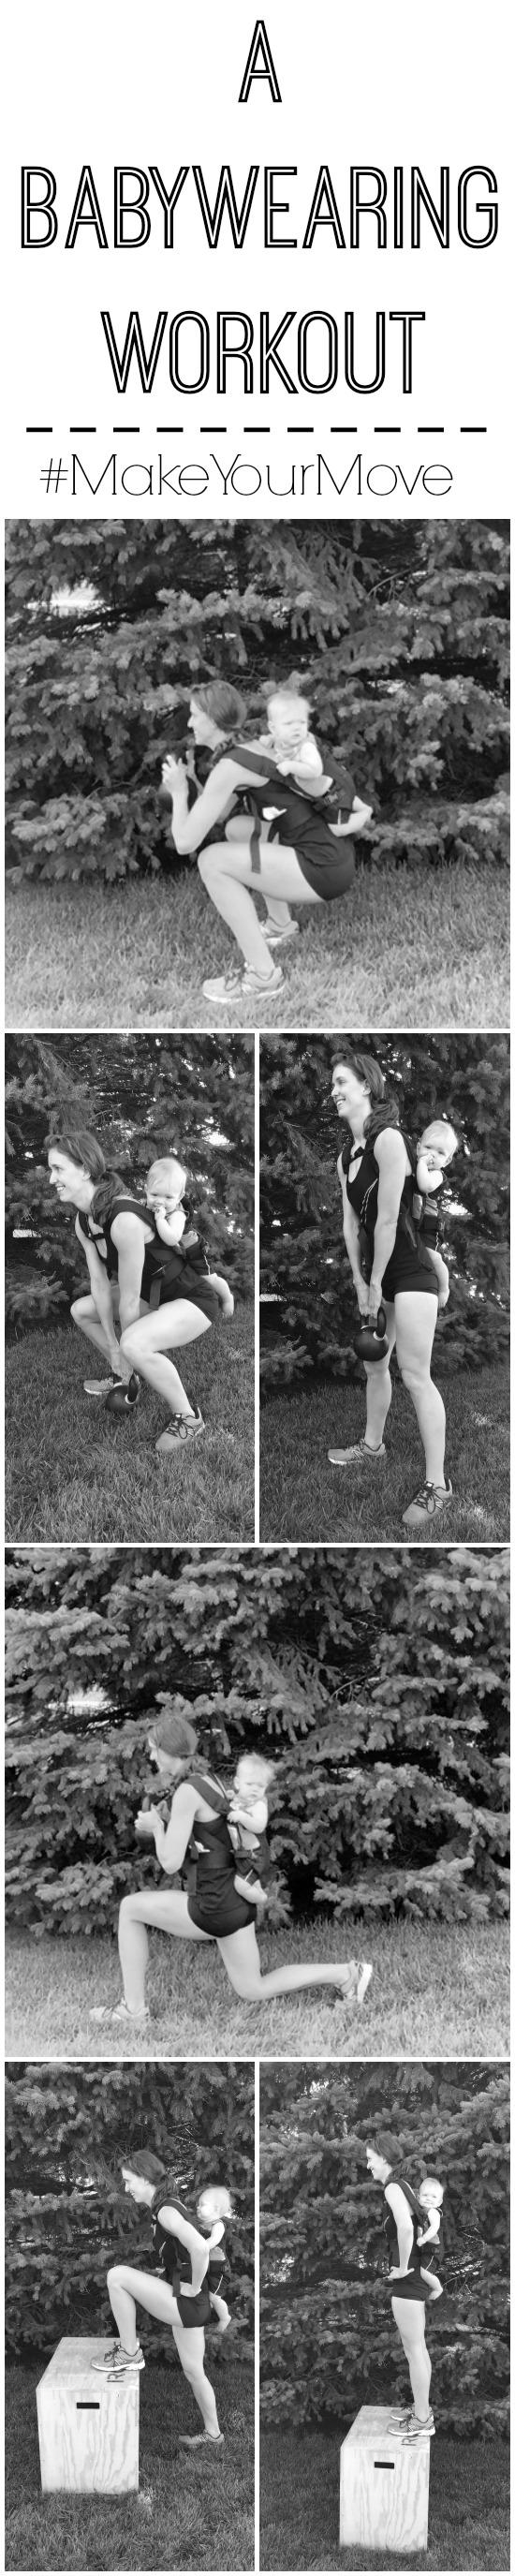 A babywearing workout that targets the lower body and can be done at home while wearing your baby.